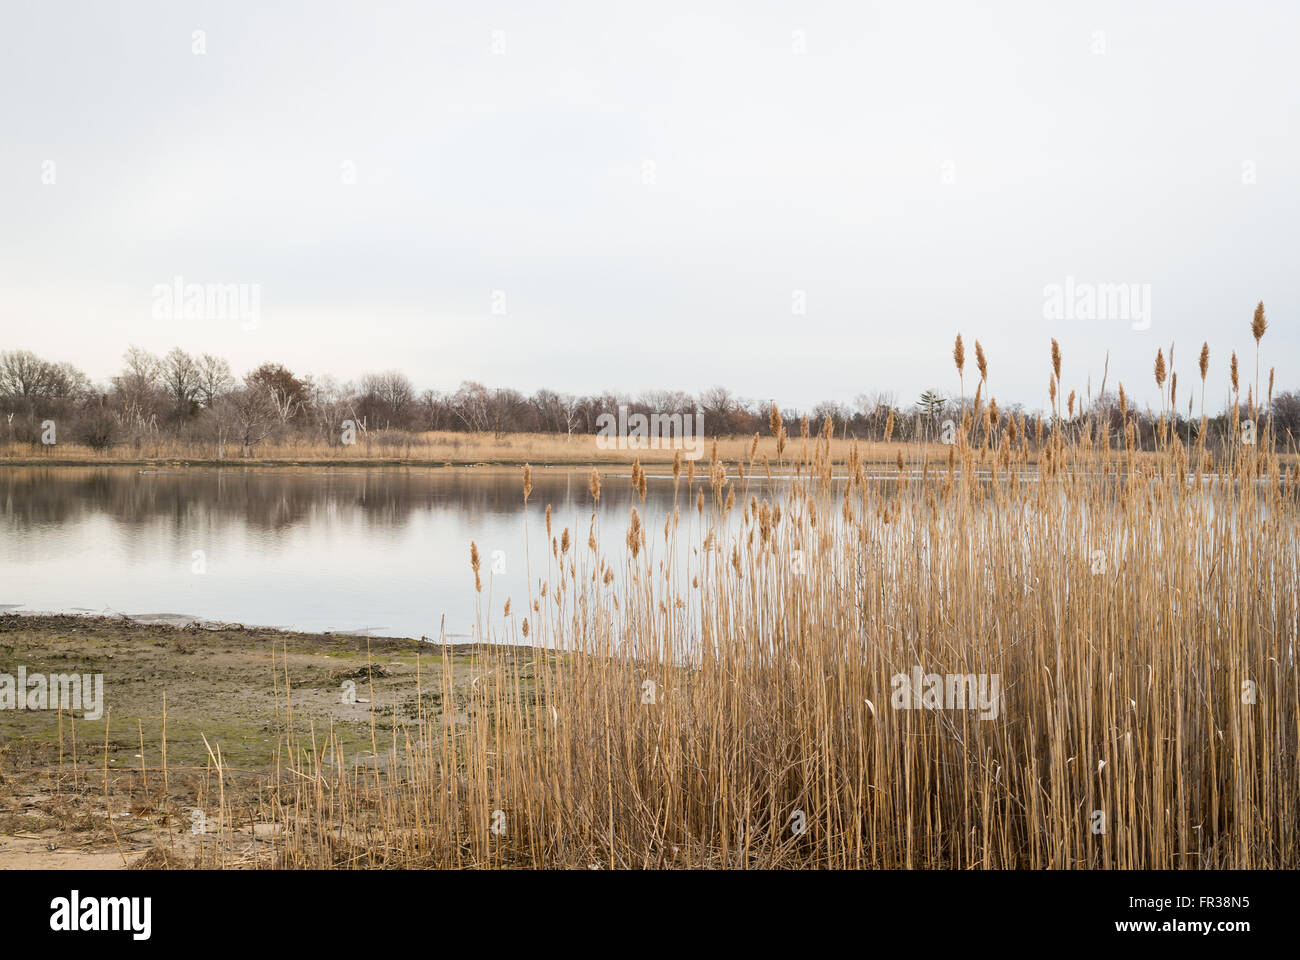 View across the West Pond at the Jamaica Bay Wildlife Refuge in New York, with Common Reeds (Phragmites australis) in foreground Stock Photo